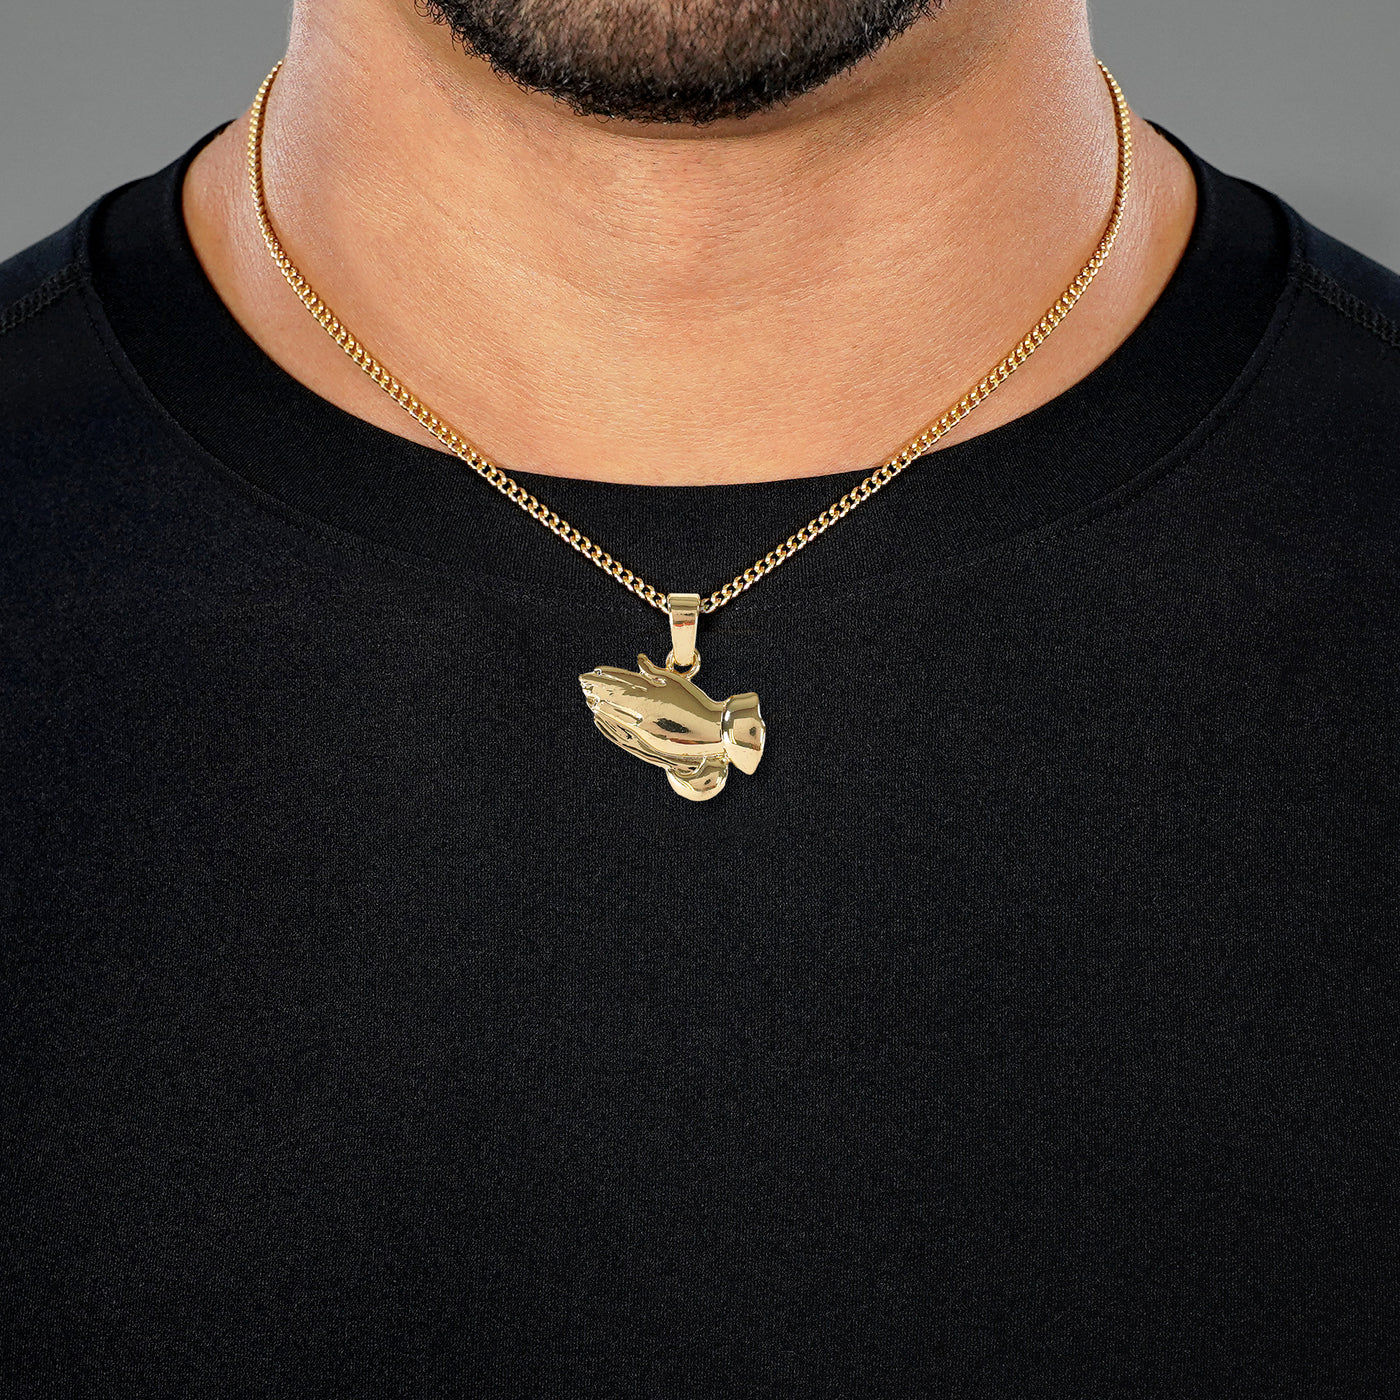 Praying Hands 1½" Pendant with Chain Necklace - Gold Plated Stainless Steel